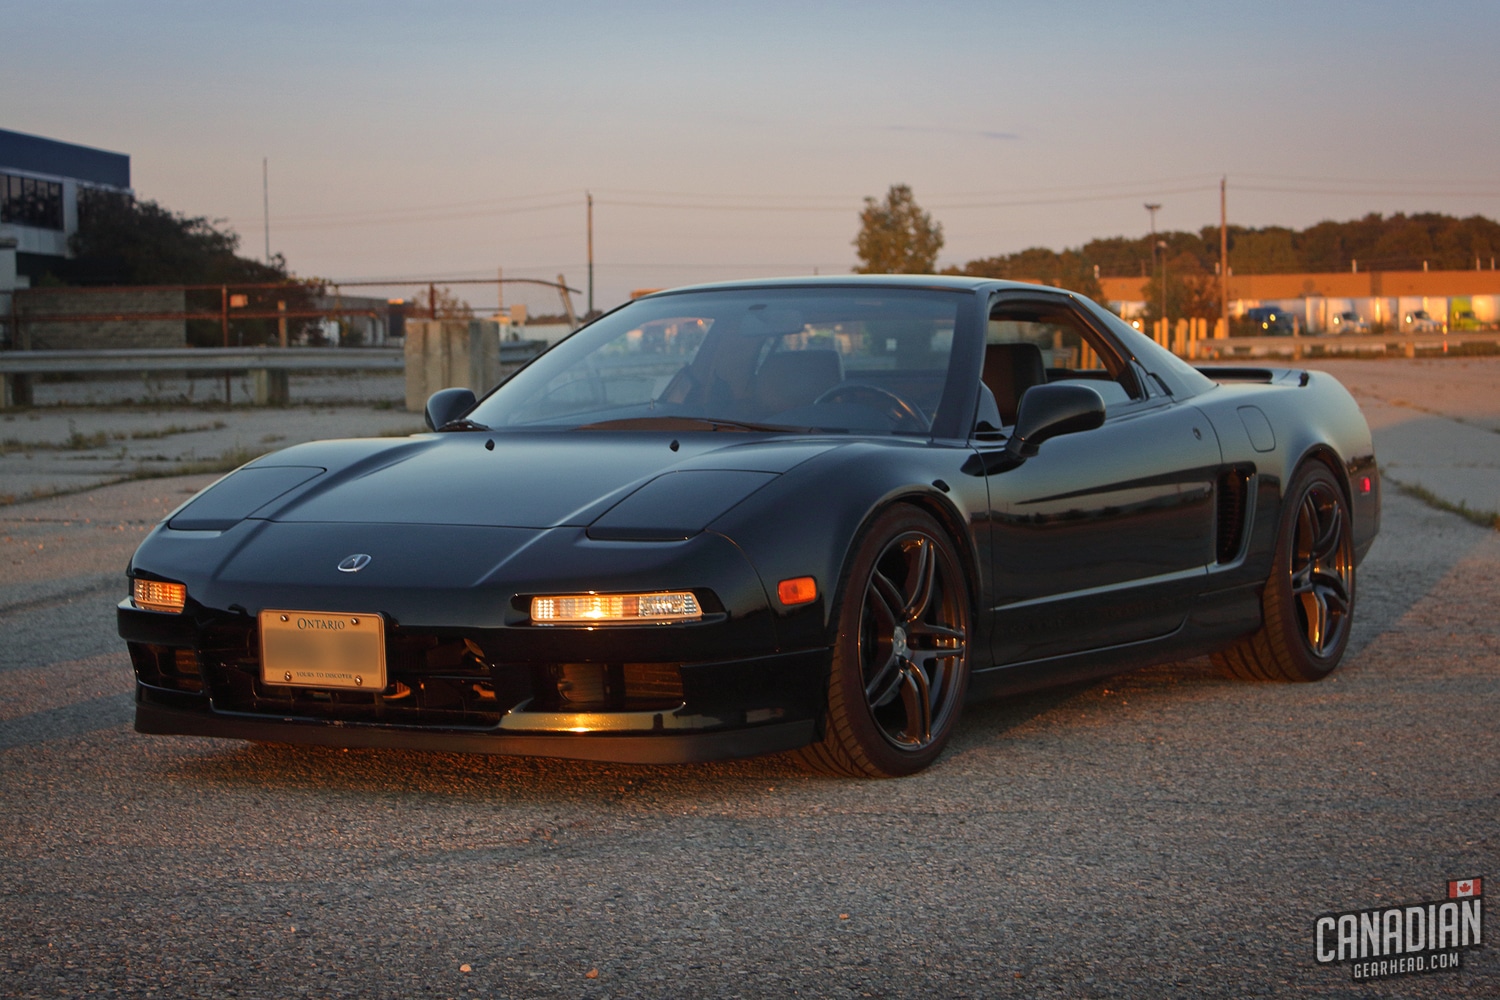 Acura NSX and Datsun 280Z Feature